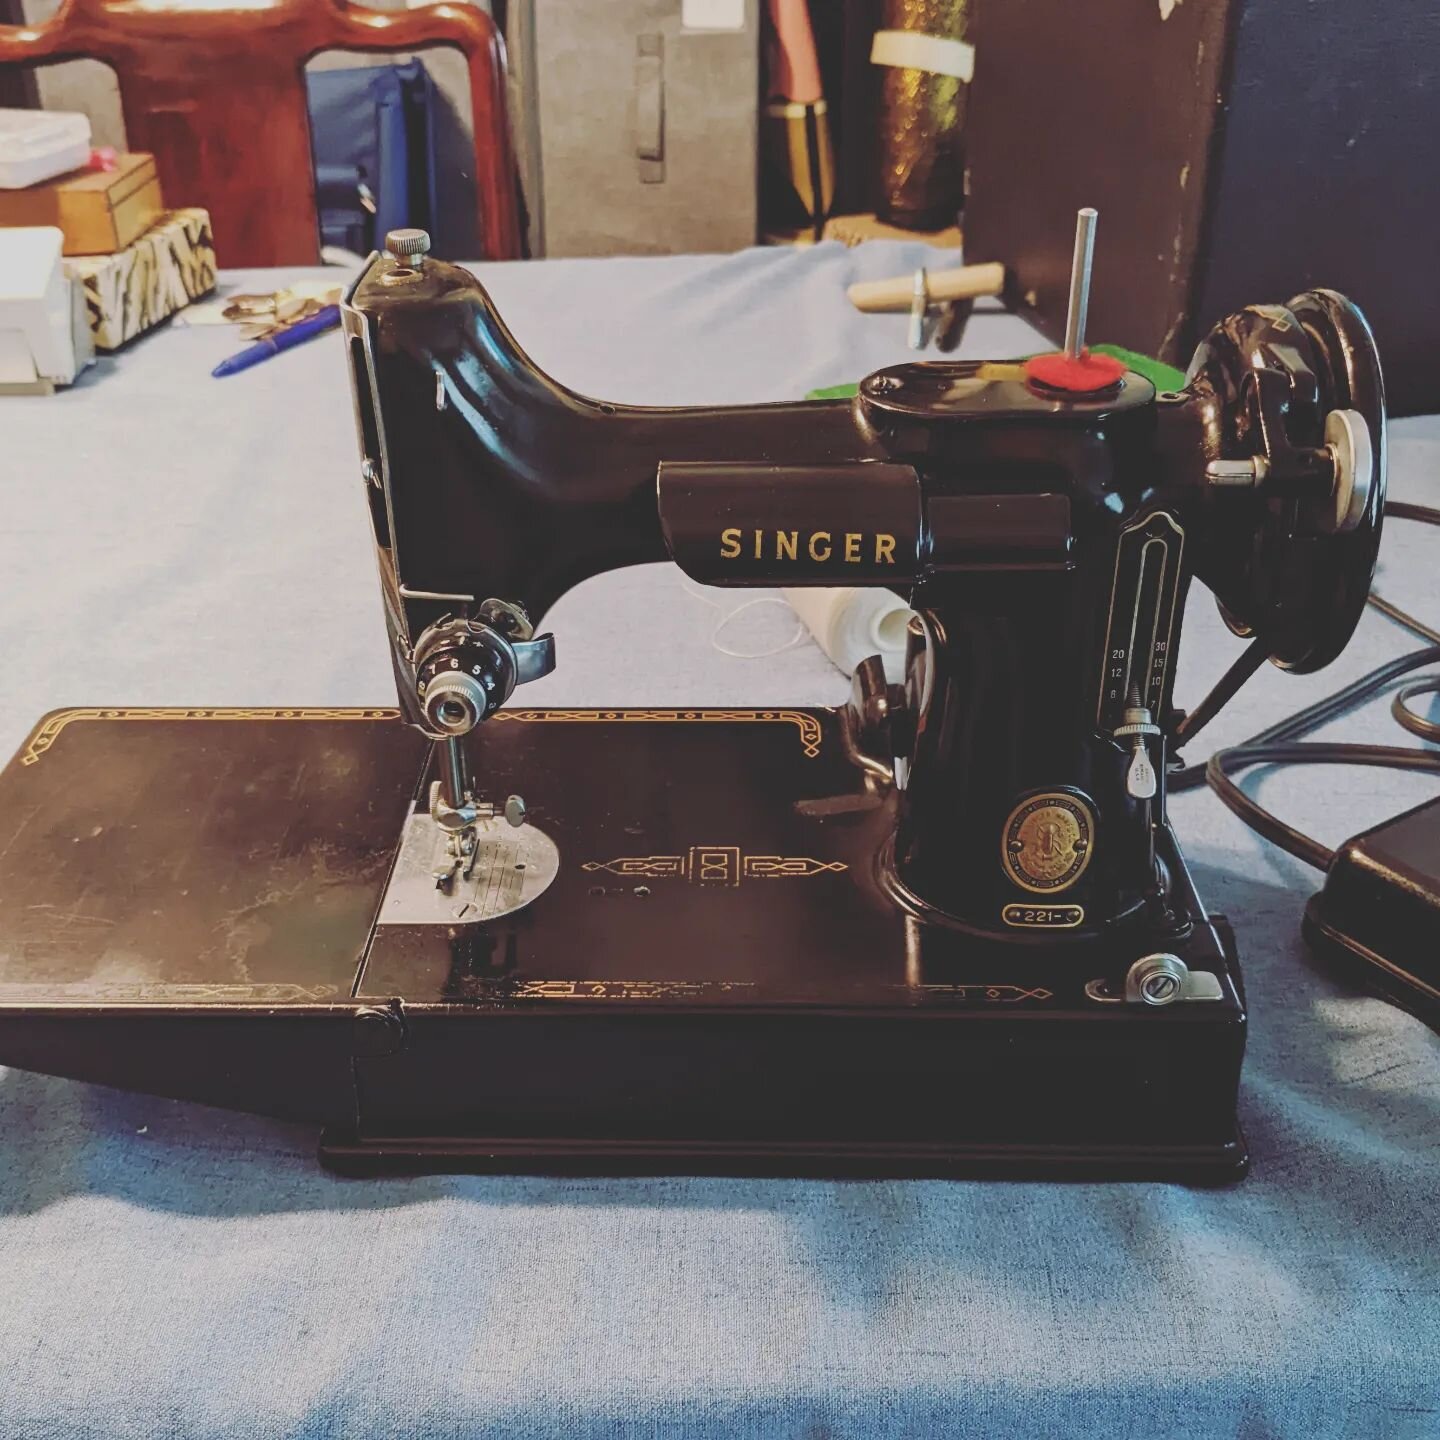 I may be small but I am mighty. I have missed her. All oiled up and ready for adventure. I still can't get over how light she is compared to all my other machines. Waiting on a new electronic presser foot so I don't sew from 0-60 in one second. Not b